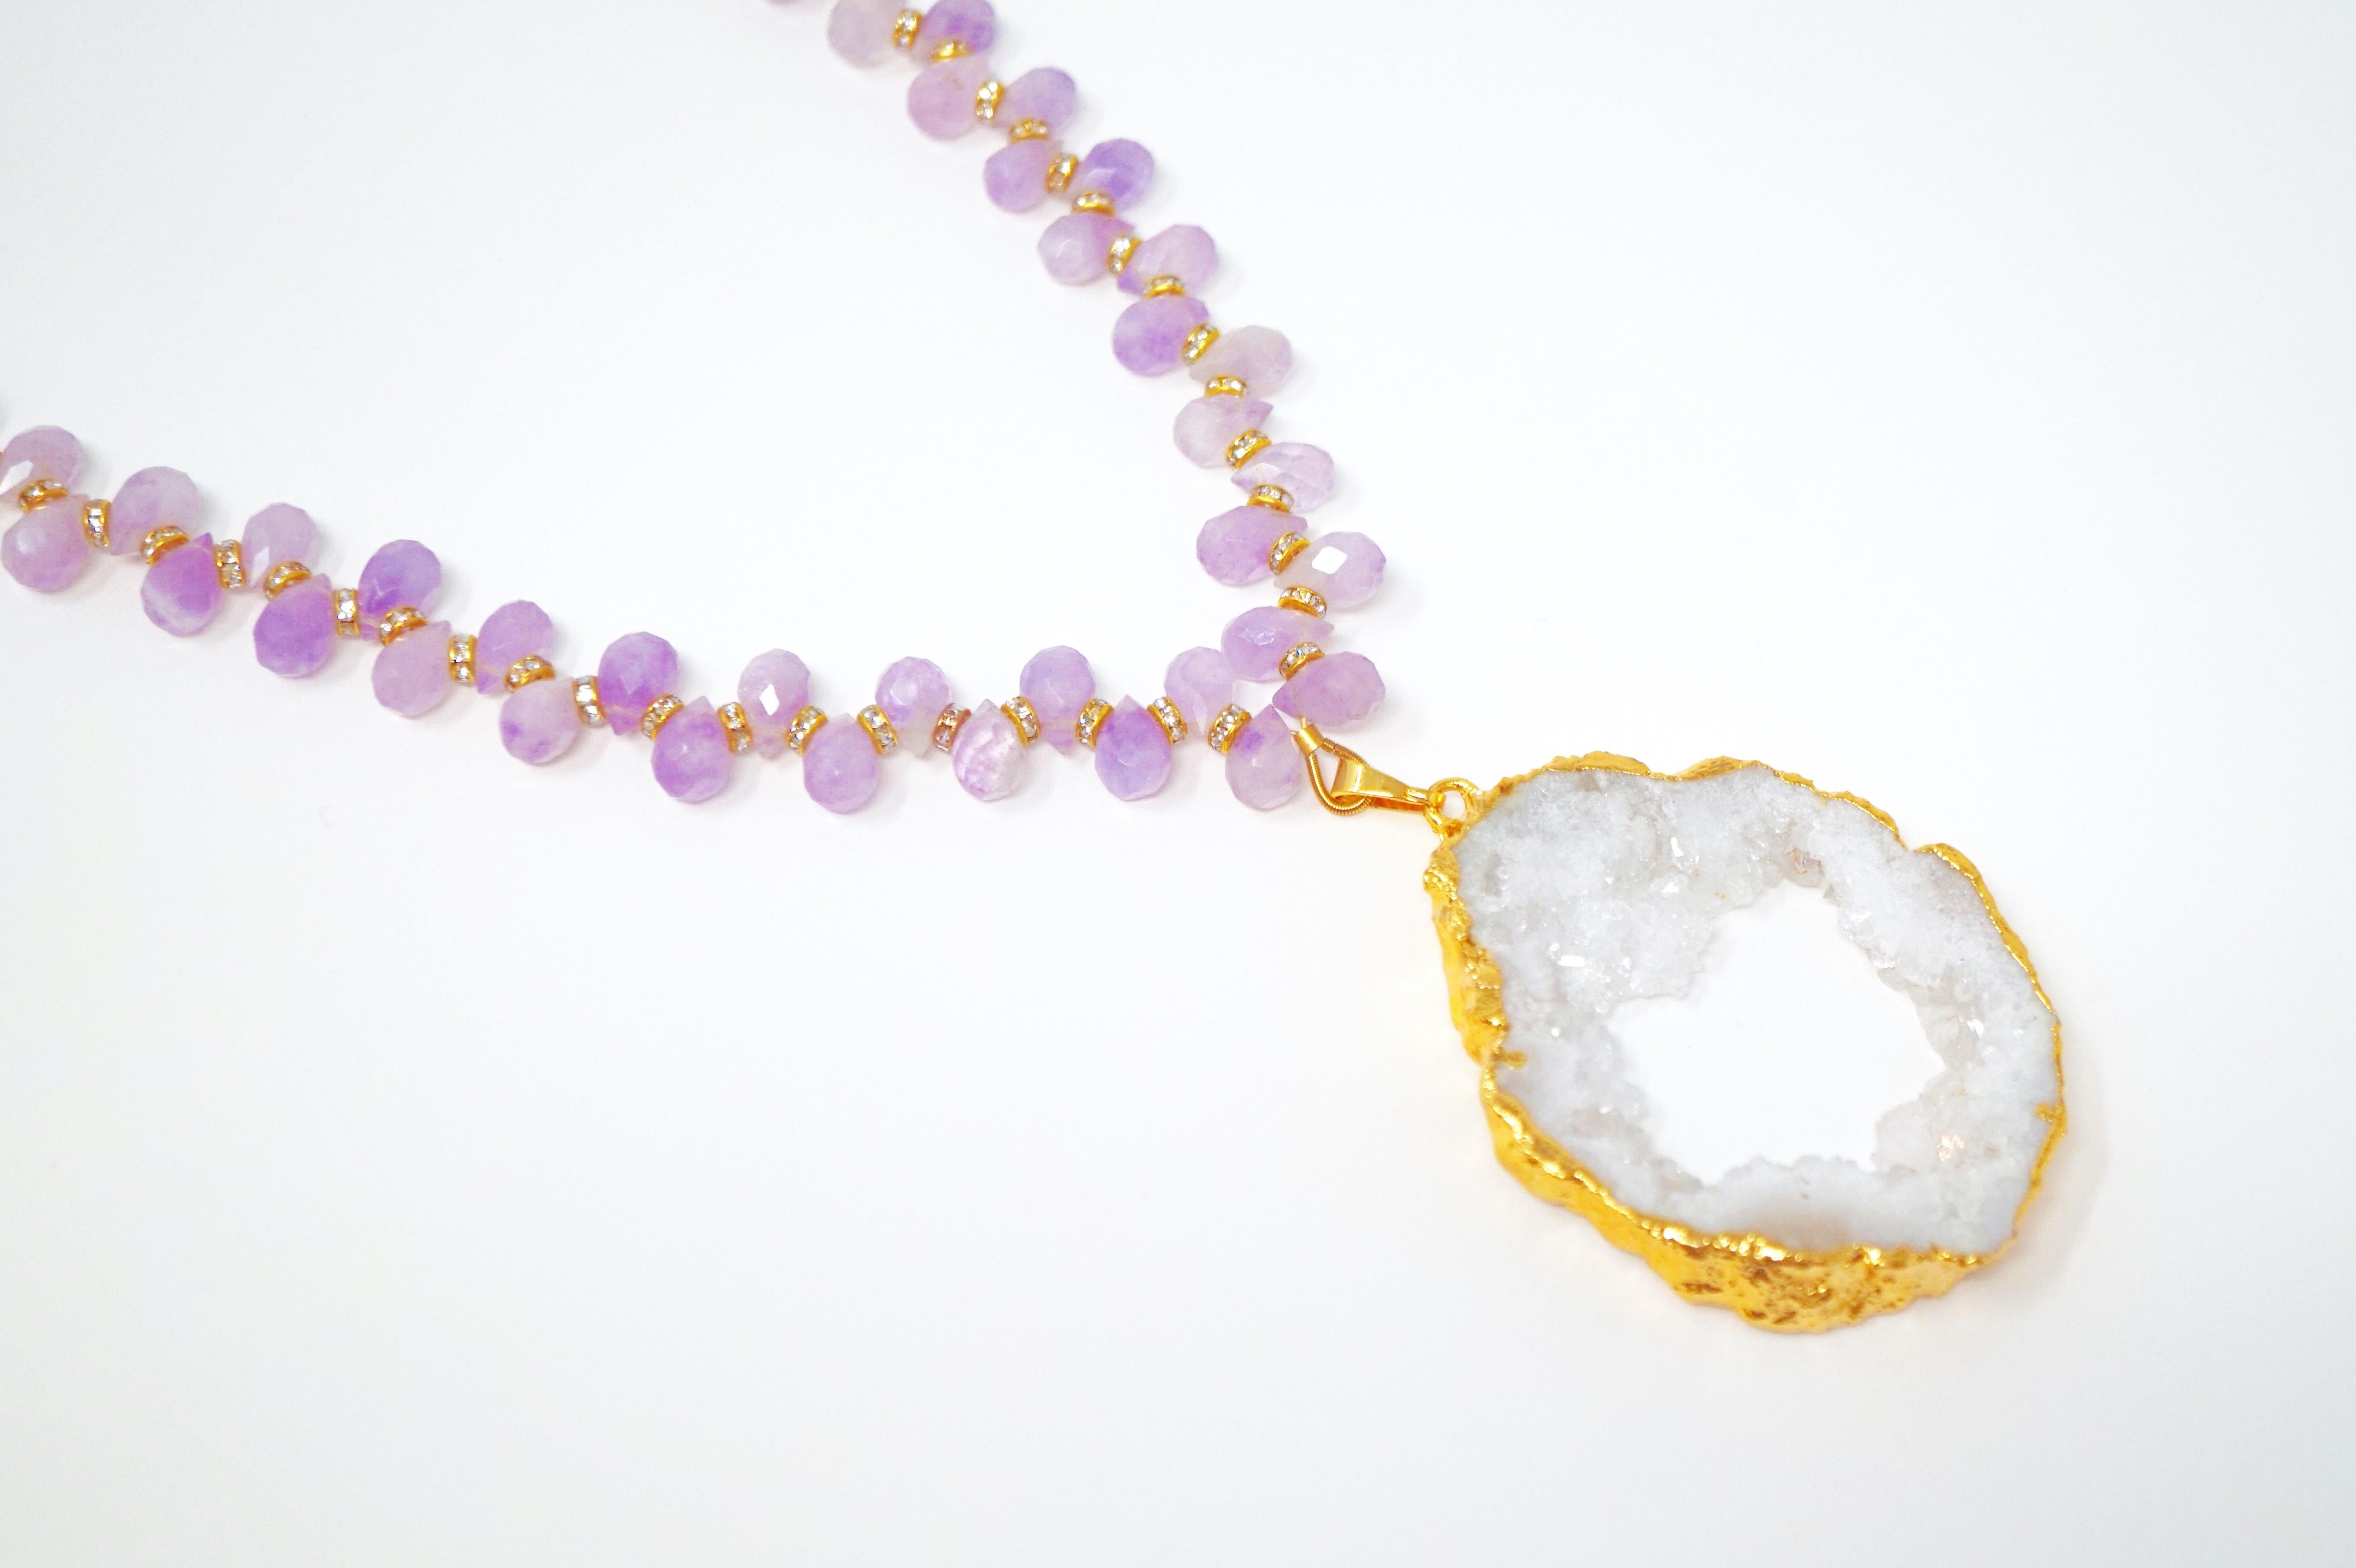 This gorgeous gemstone pendant necklace is composed of faceted teardrop Amethyst gemstones flanked by gold-plated Swarovski crystal accent beads with a natural druzy geode slice pendant with gold electroplated edges.

DETAILS:
- Clasp closure
-